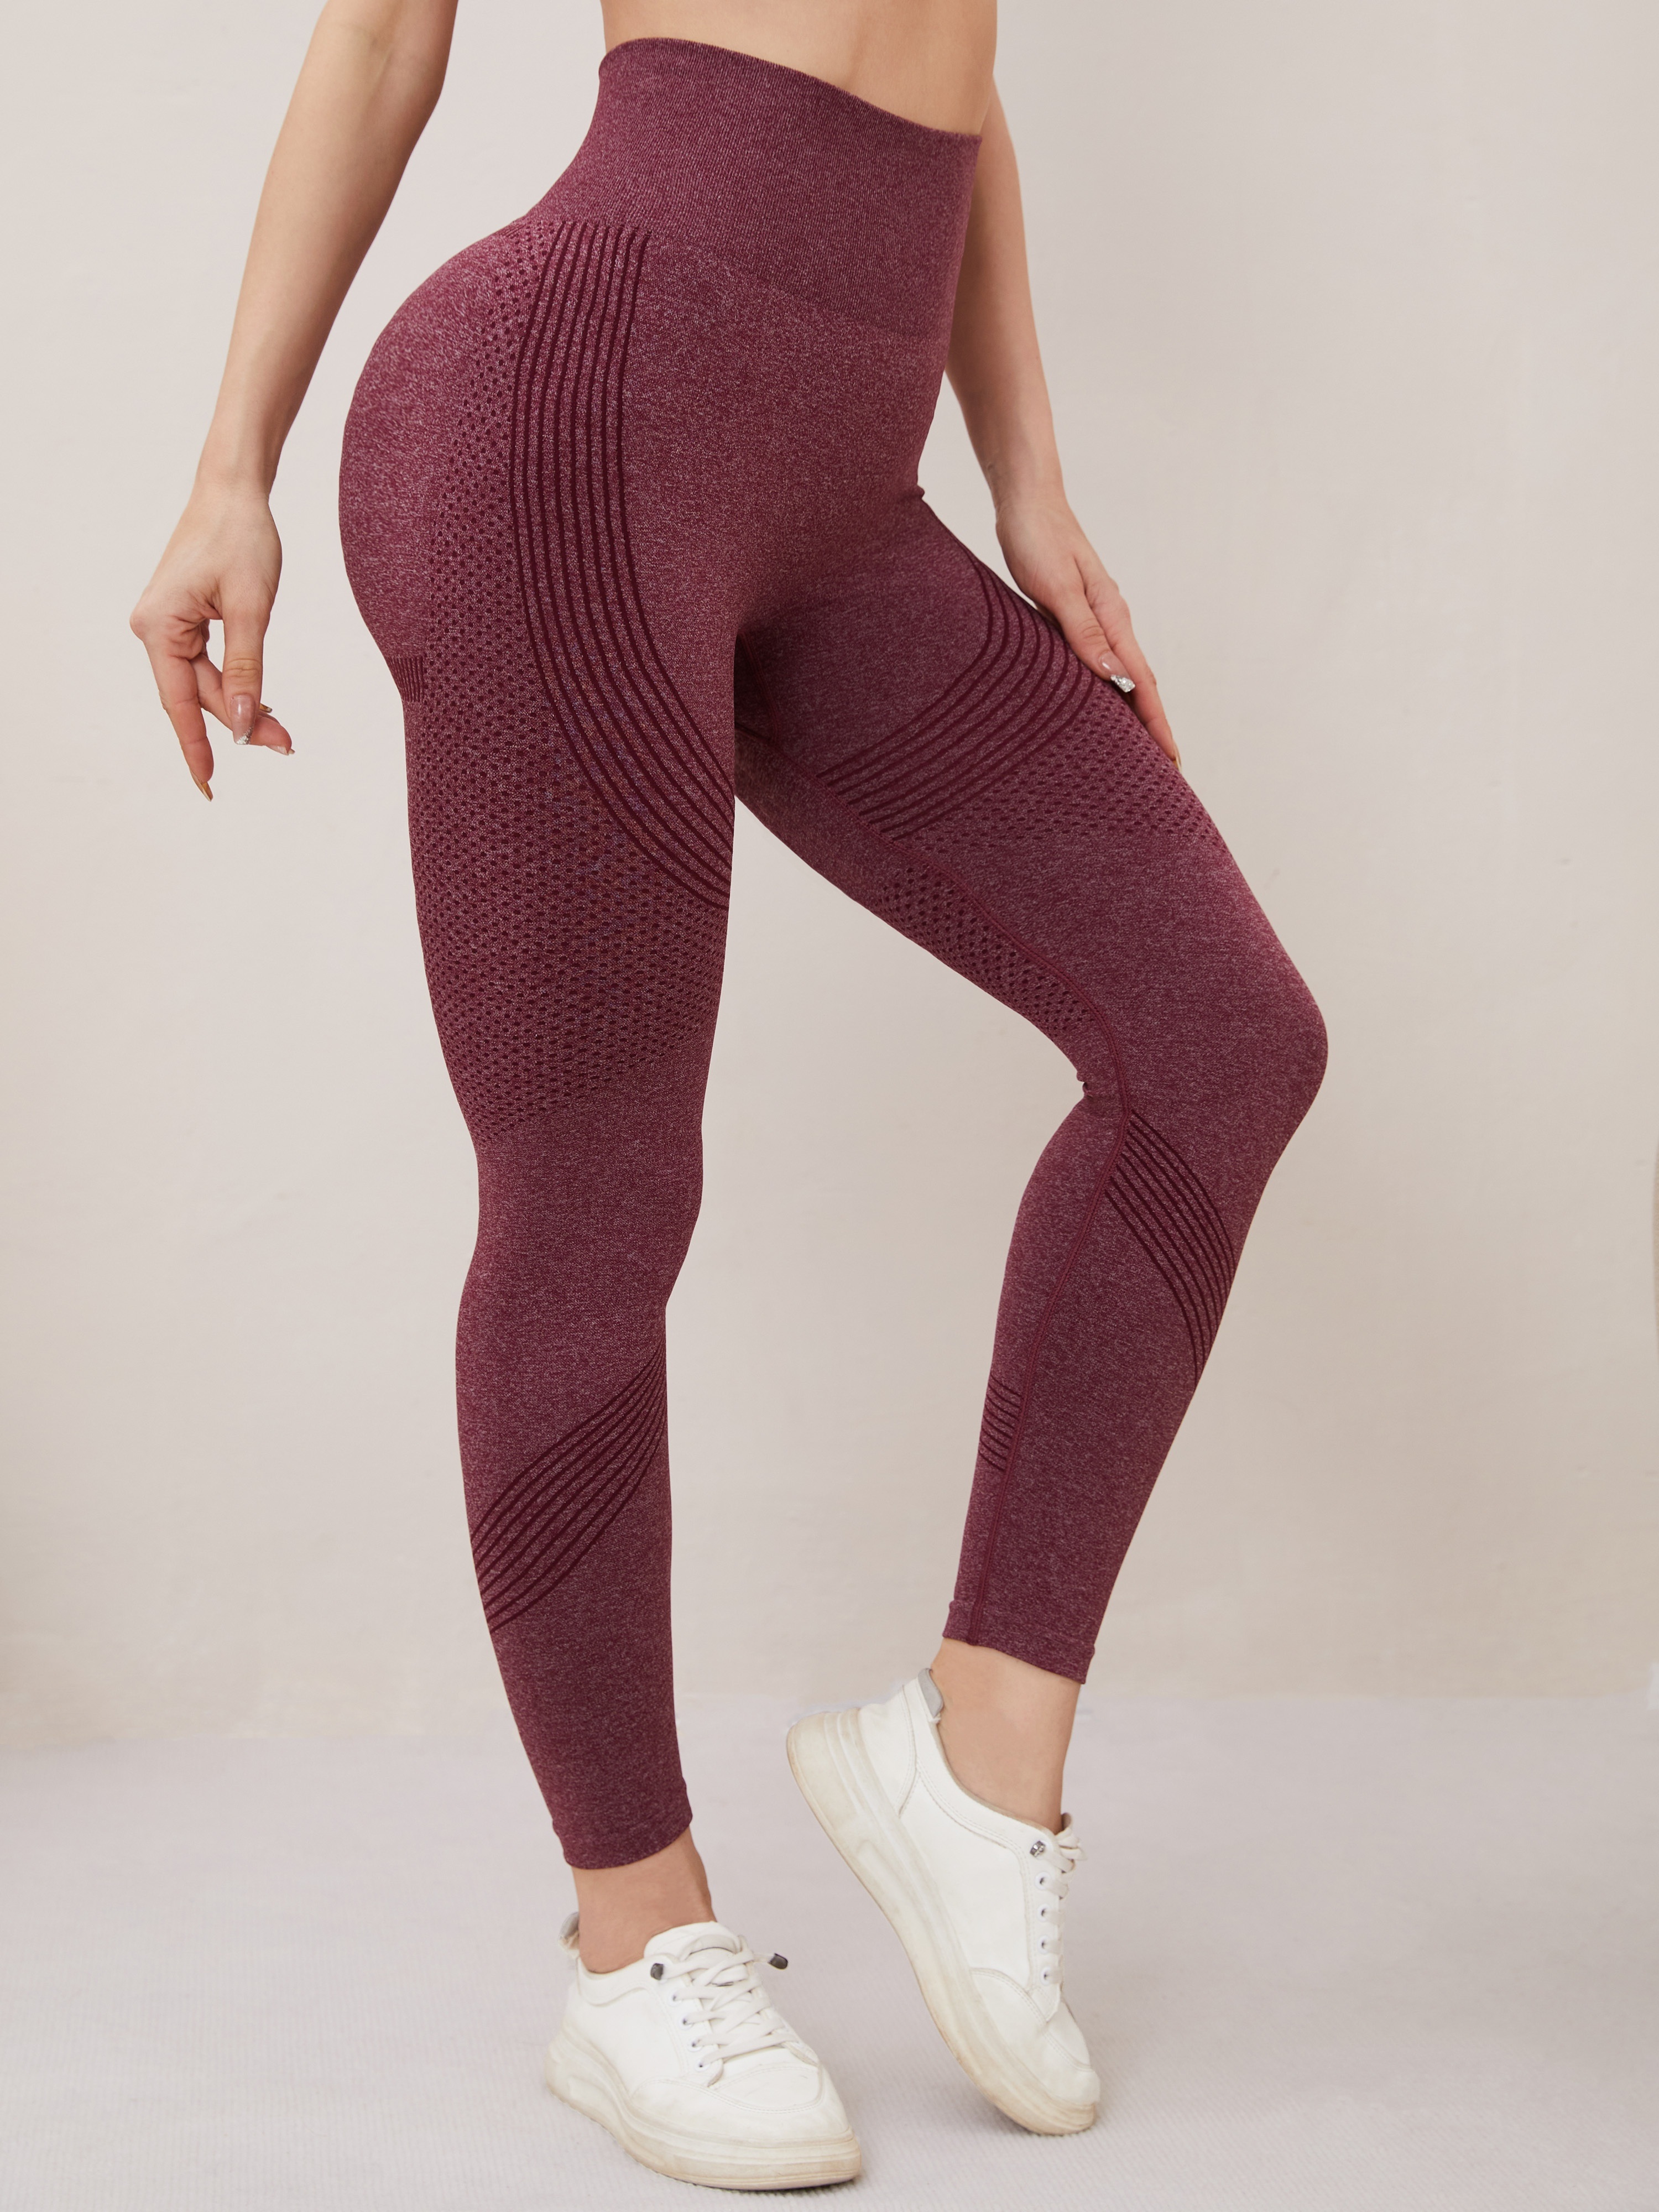 High Waisted Traceless Short Leggings With Pockets For Women 5 Point Gym  Leggings, Pants, And Sports Clothes With Hip Lift For Summer Fitness And  Biking In Nude From Luyogastar, $21.9